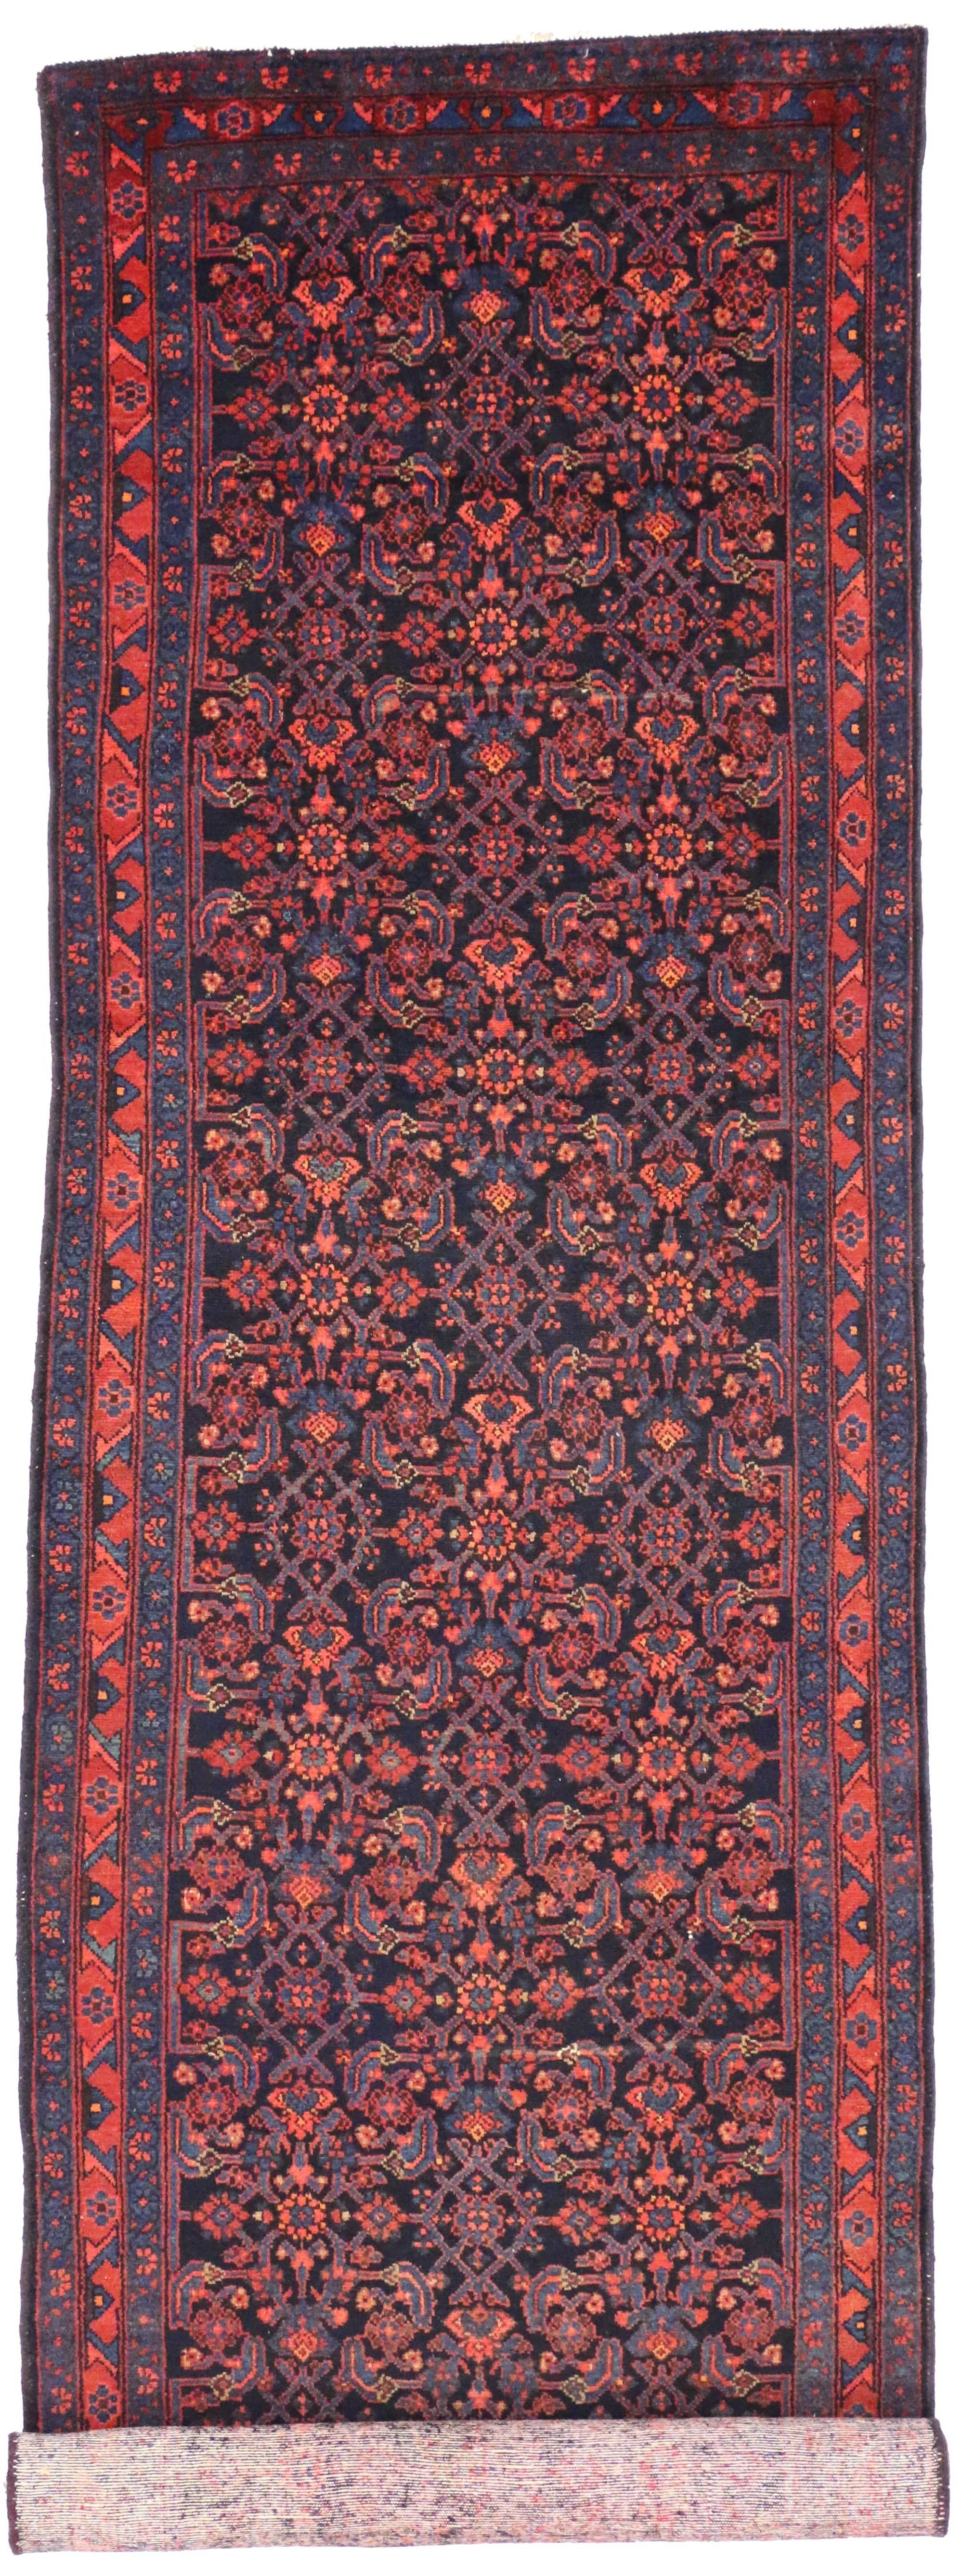 Antique Persian Malayer Runner with Modern Victorian Style 4